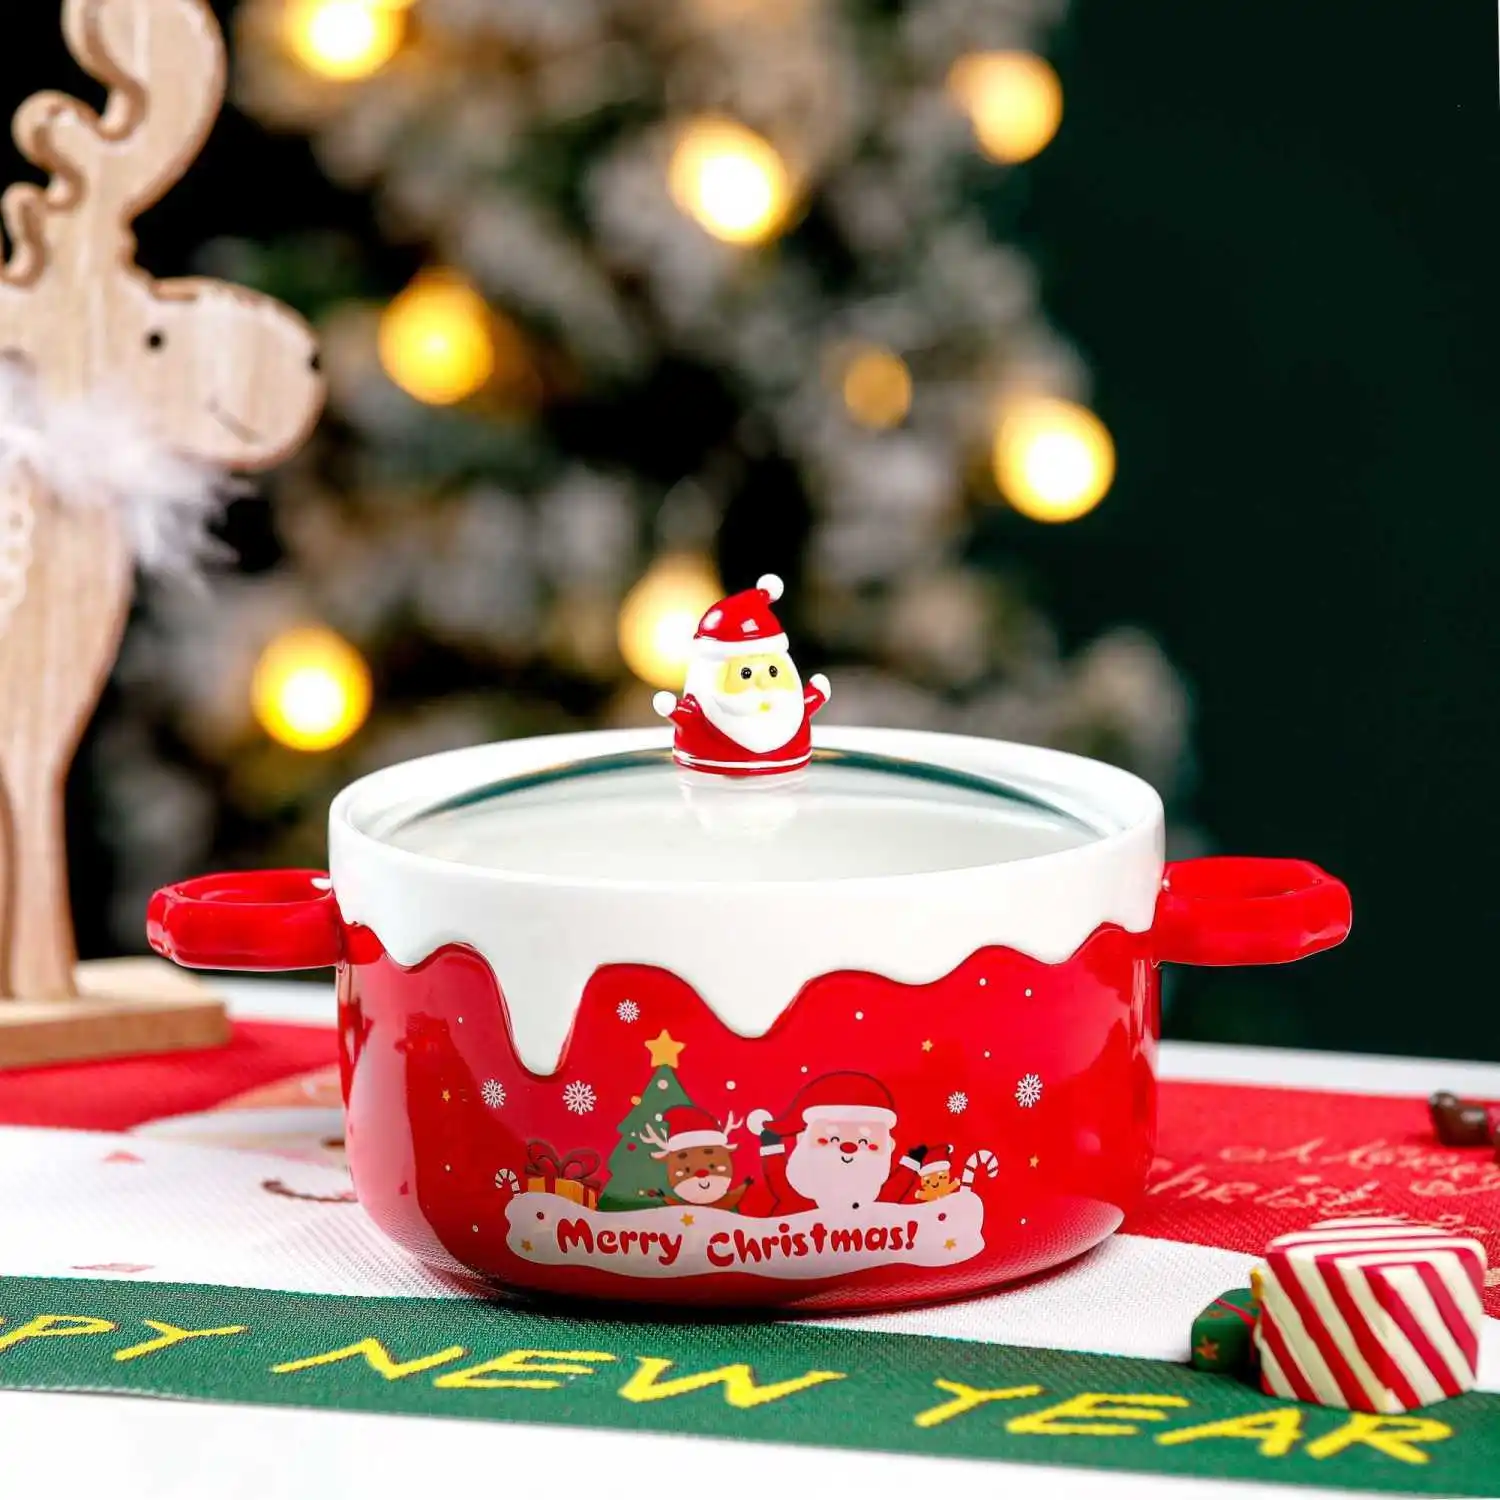 https://ae01.alicdn.com/kf/Scf7b12c5ce2a454ca7f7f6e22049dadfa/Christmas-themed-instant-noodle-bowl-with-lid-ceramic-high-temperature-resistant-new-creative-large-capacity-soup.jpg